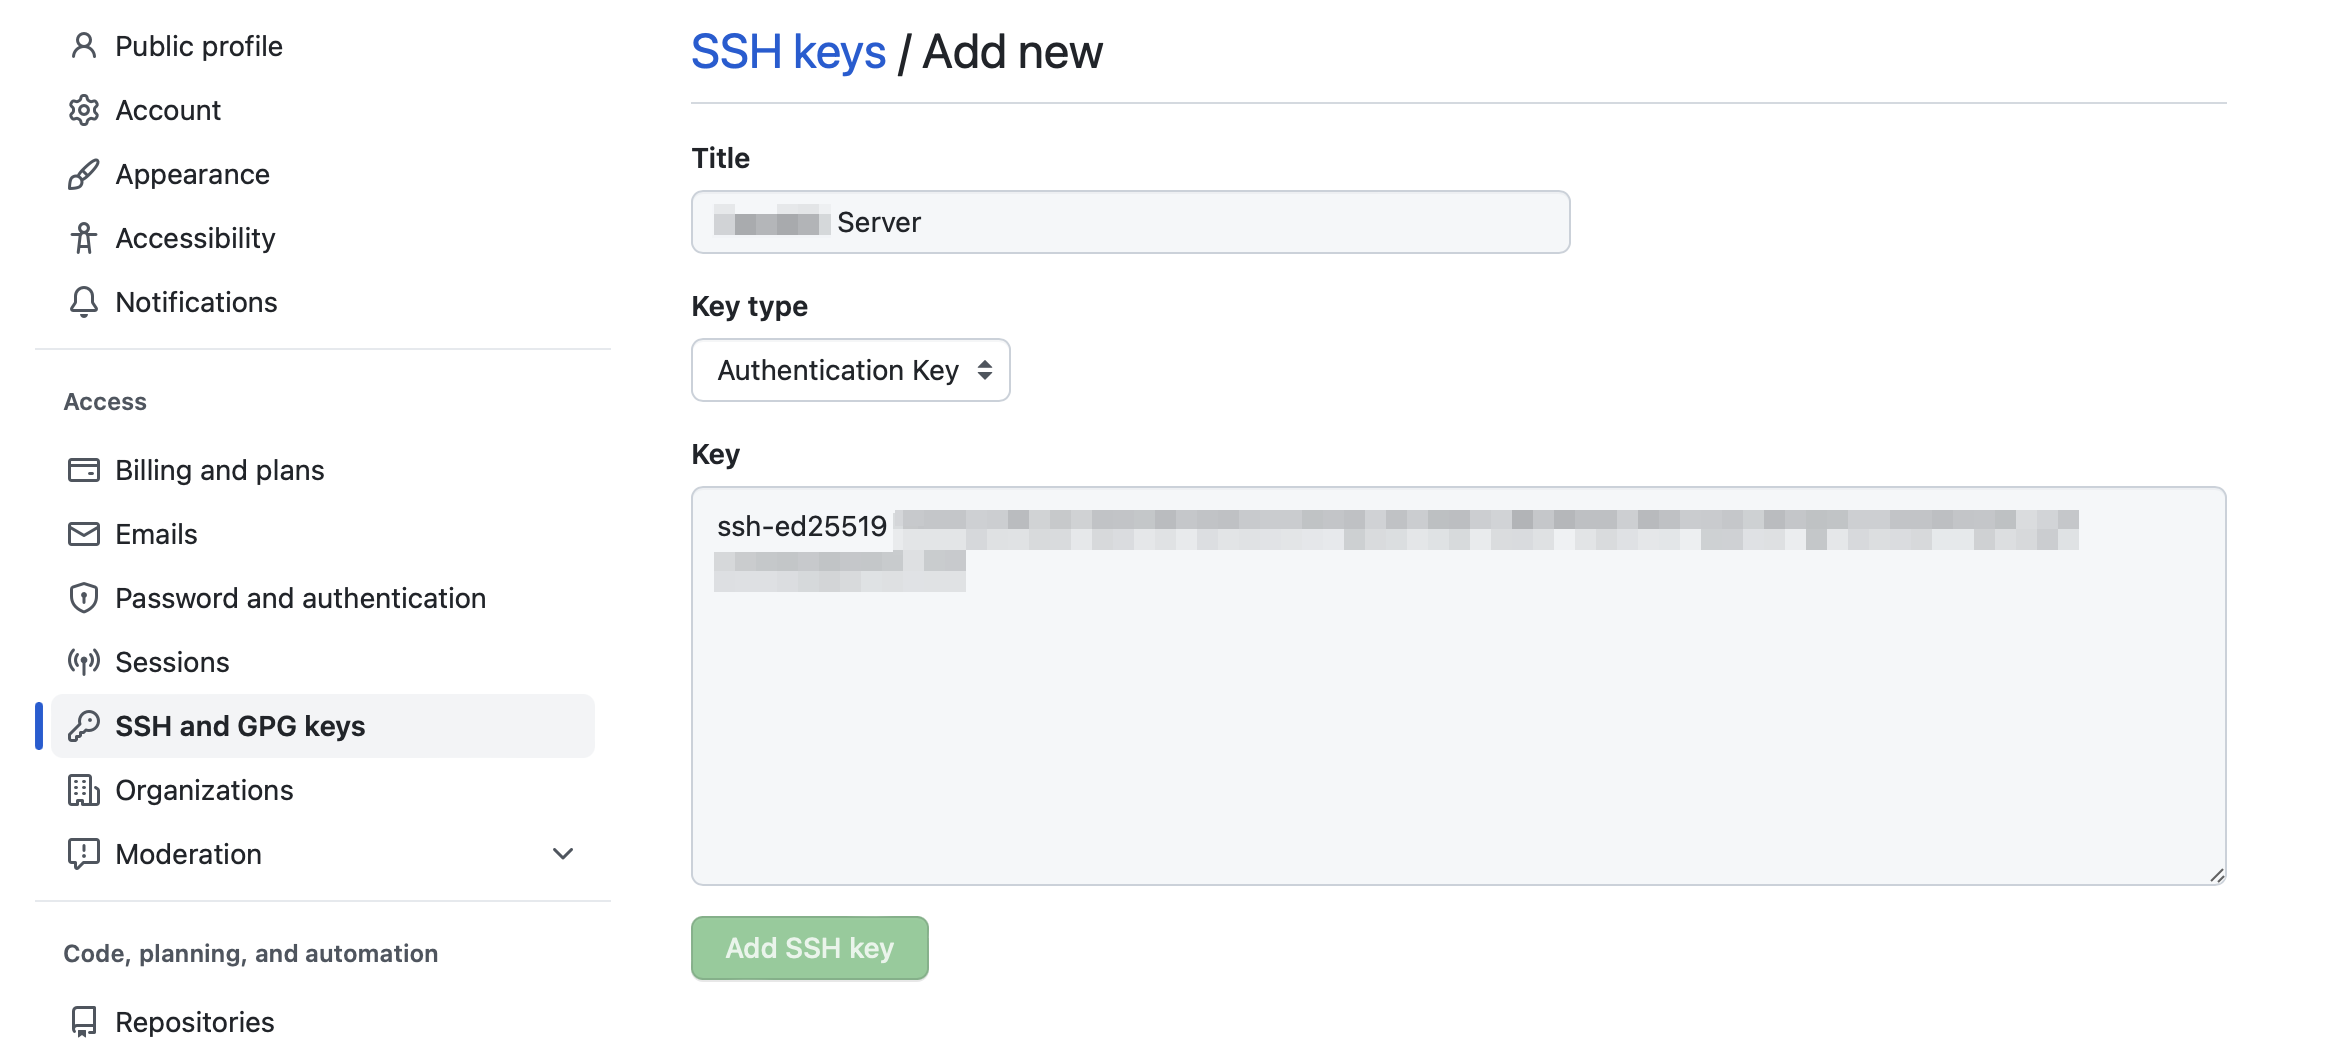 Pasting the public key contents into the key field in GitHub